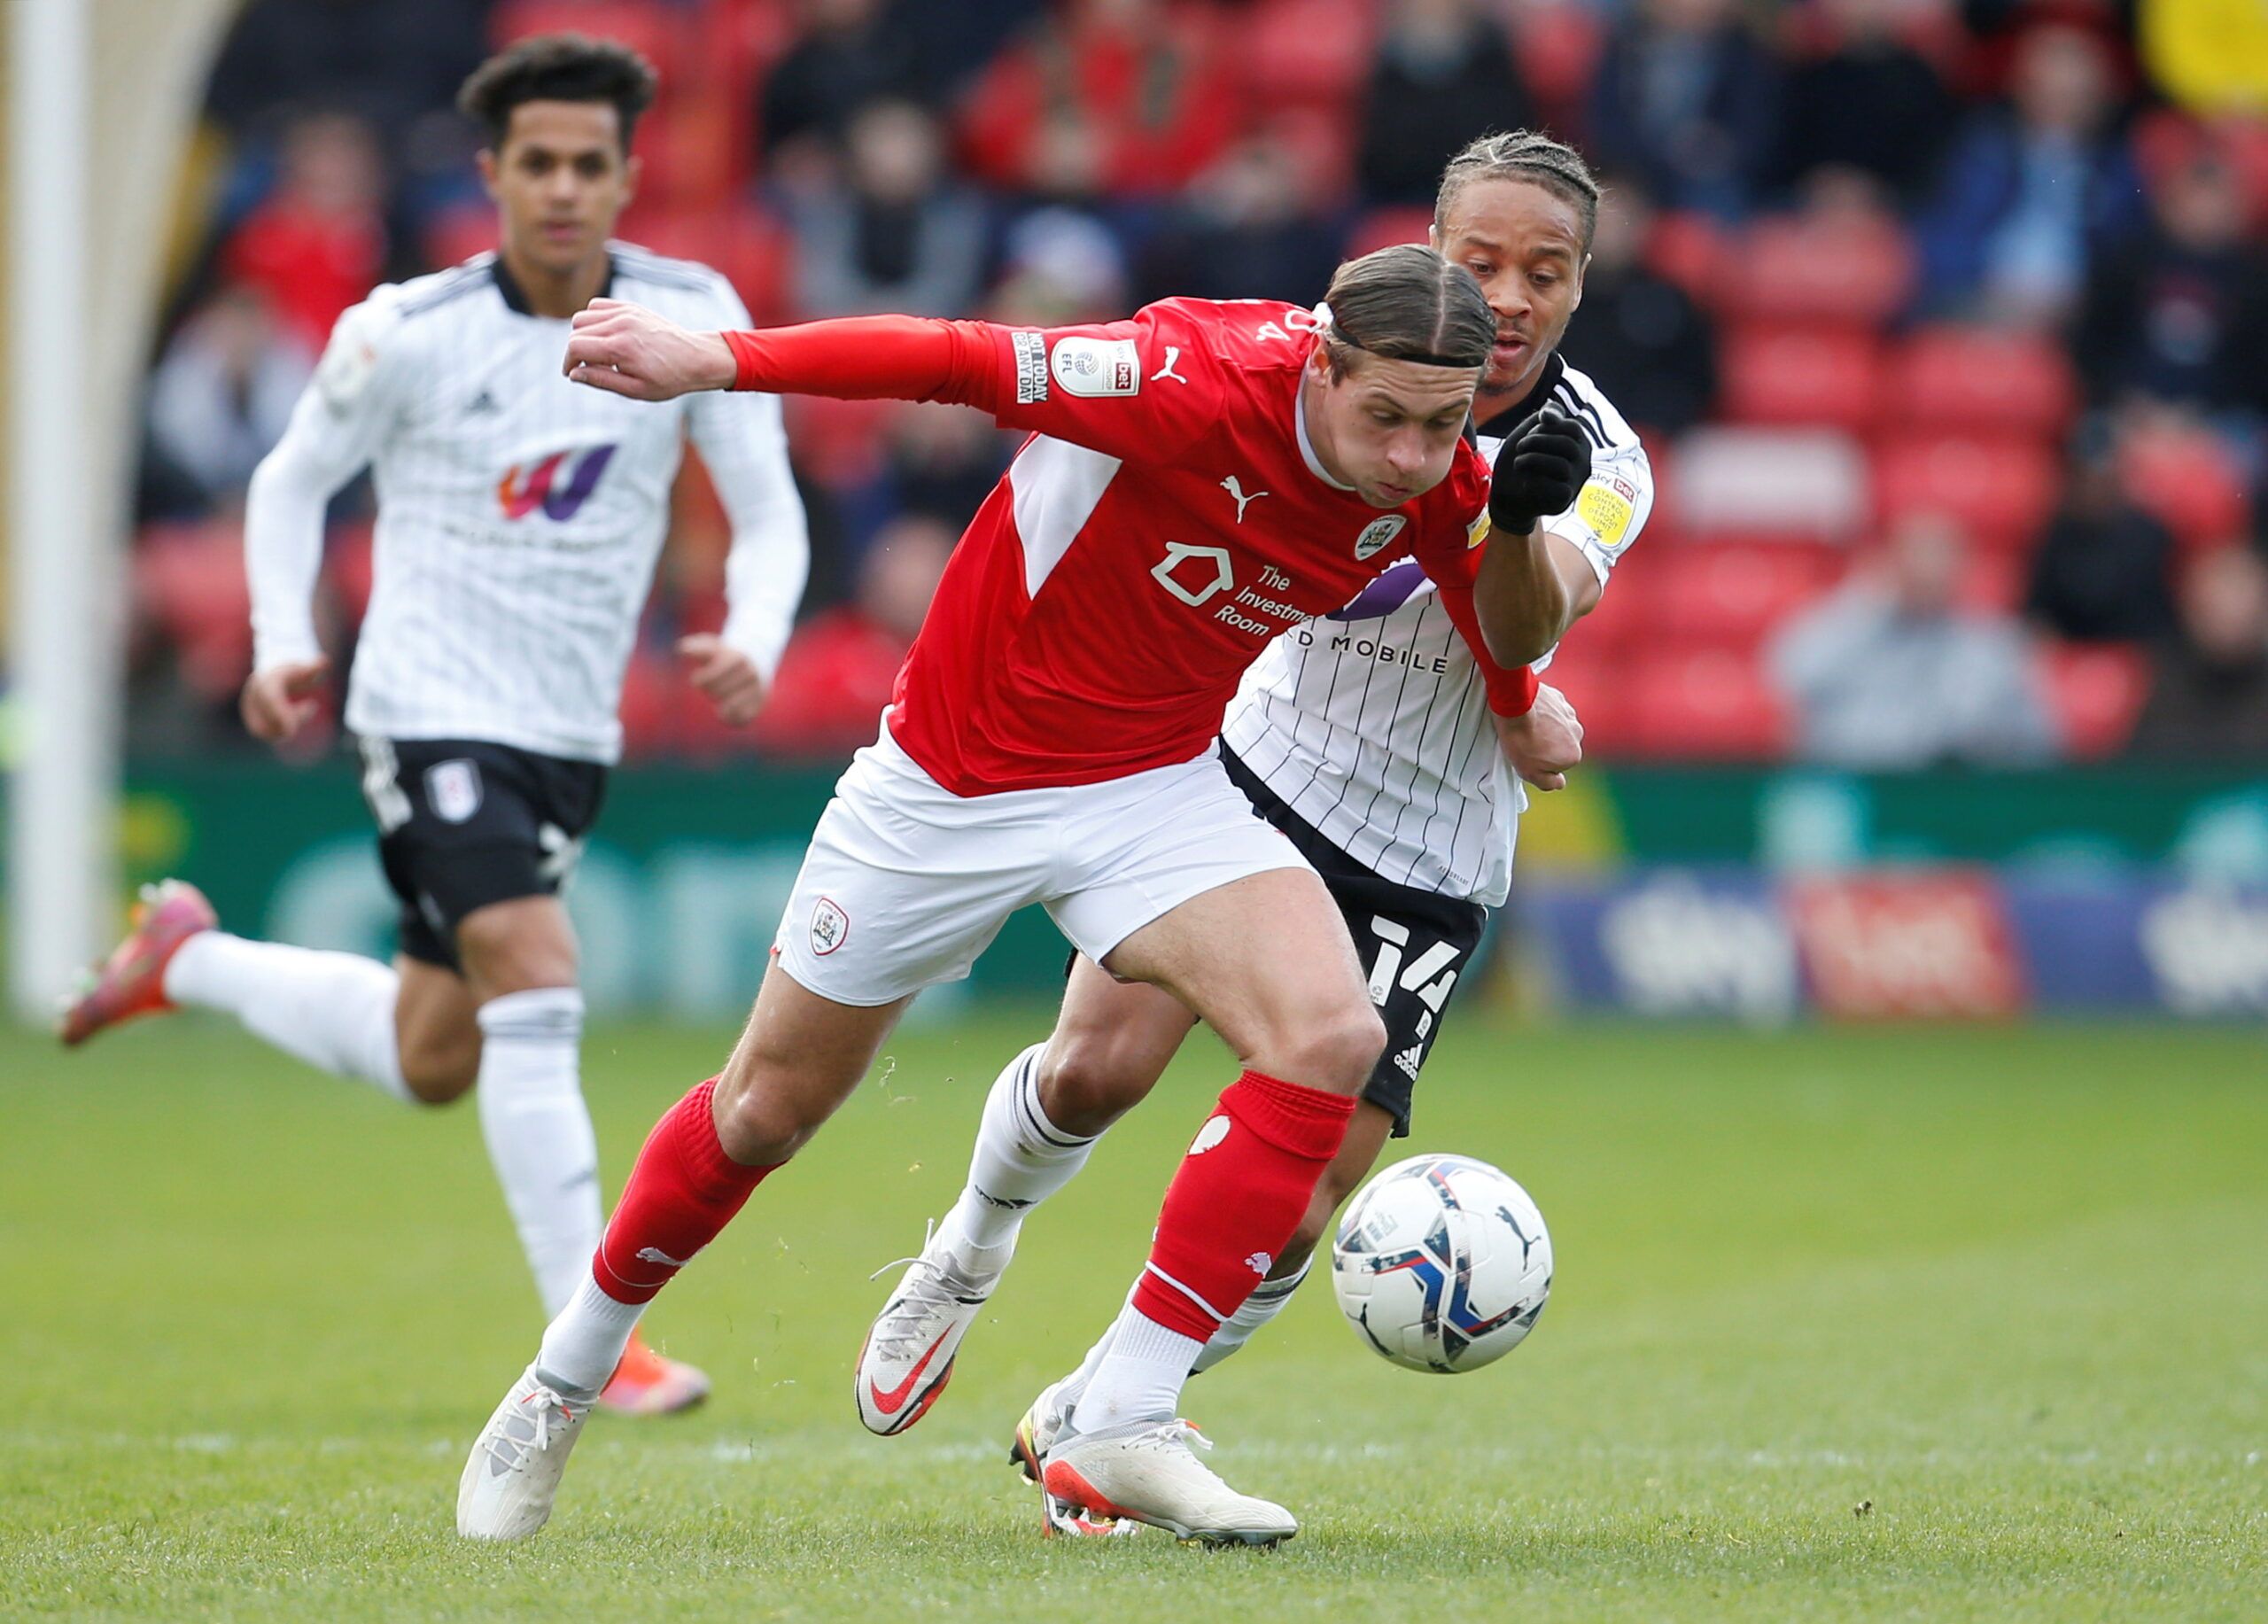 Soccer Football - Championship - Barnsley v Fulham - Oakwell, Barnsley, Britain - March 12, 2022   Barnsley's Callum Brittain in action with Fulham's Bobby Decordova-Reid  Action Images/Ed Sykes  EDITORIAL USE ONLY. No use with unauthorized audio, video, data, fixture lists, club/league logos or 